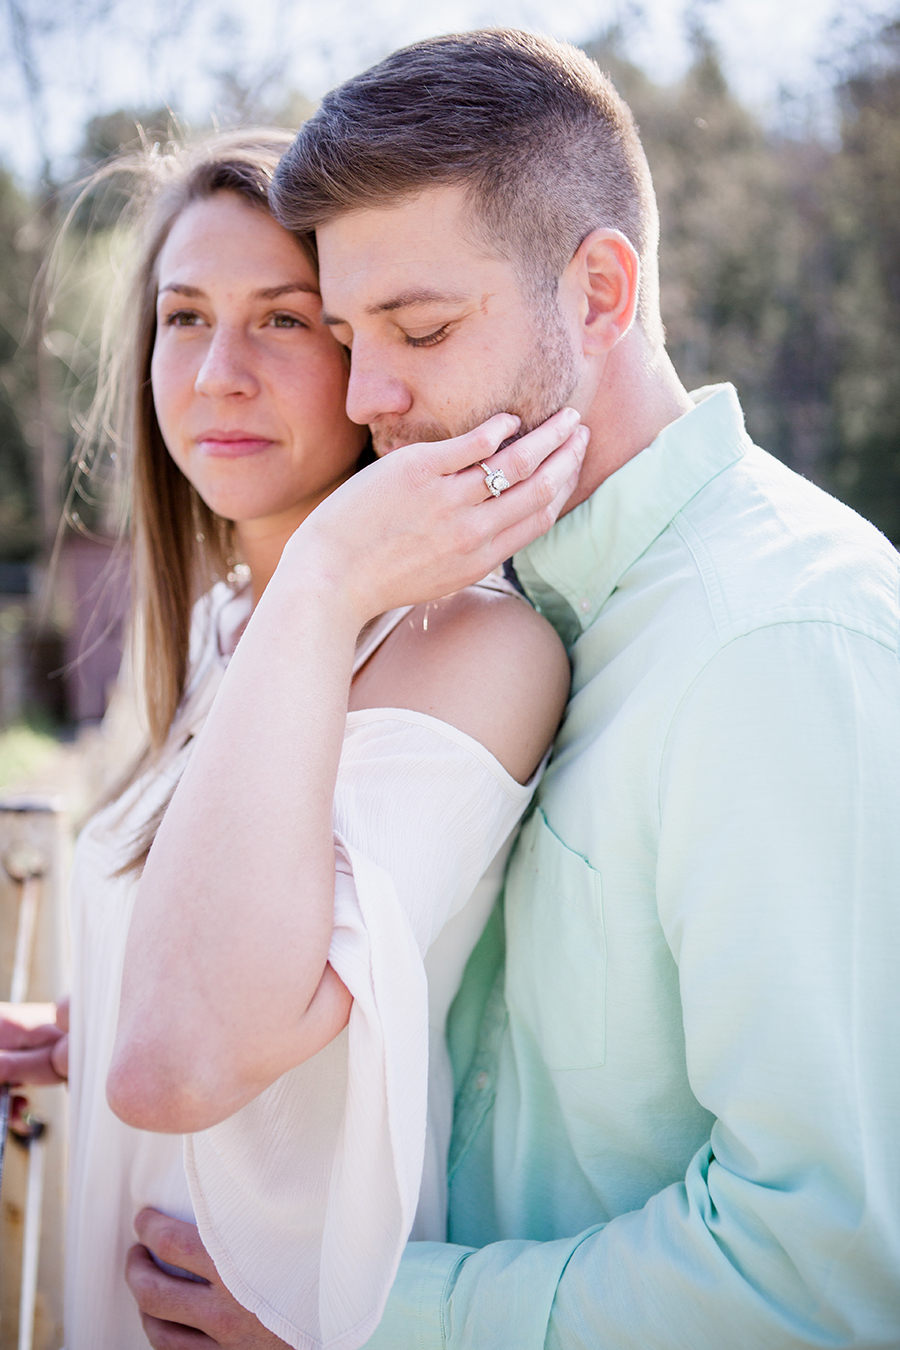 Her left hand reaching back to his cheek engagement photo by Knoxville Wedding Photographer, Amanda May Photos.